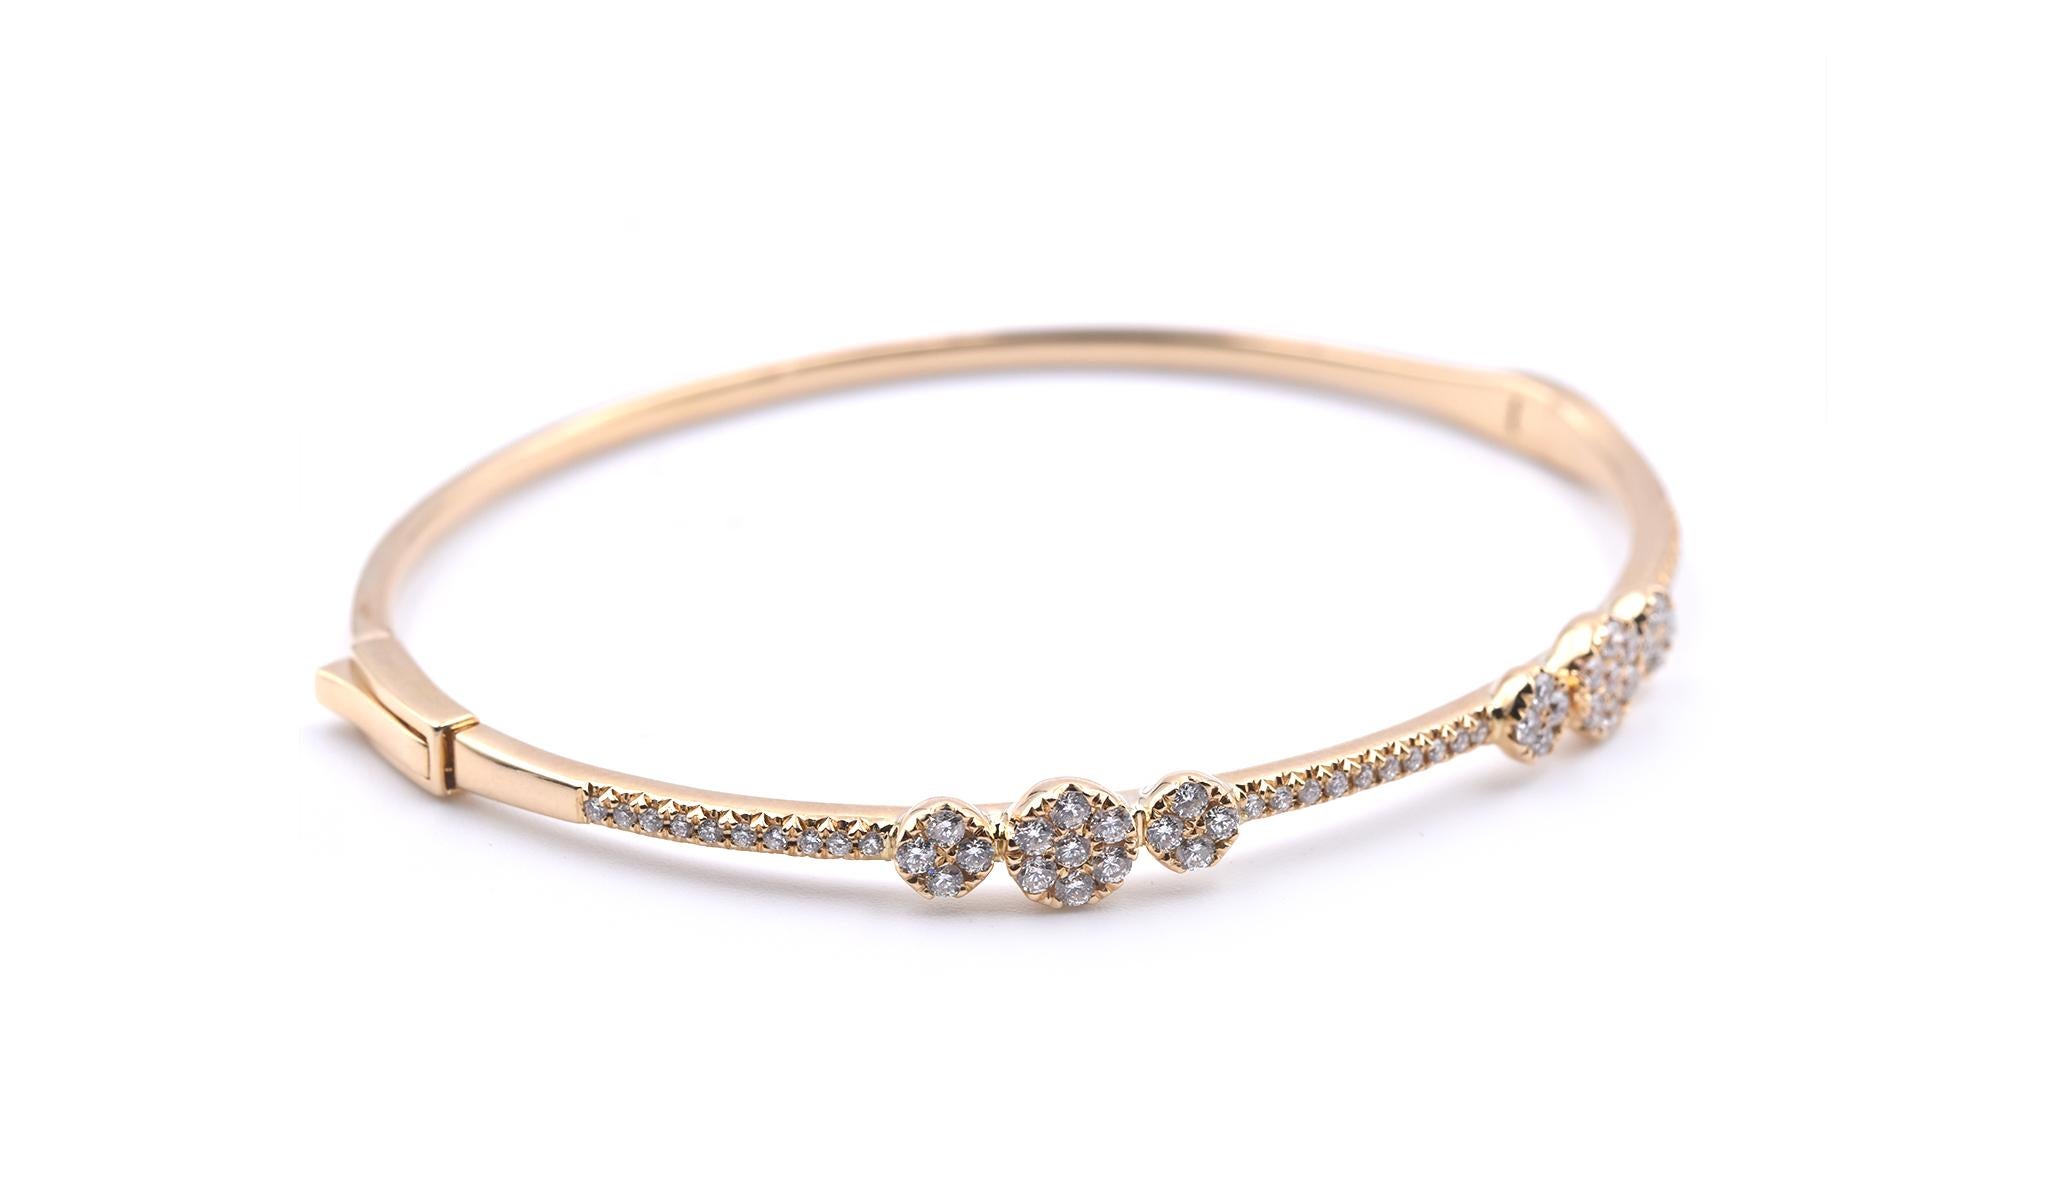 Designer: custom design
Material: 18k yellow gold
Diamonds: 60 round brilliant cut= .70cttw
Color: H
Clarity: SI1
Dimensions: bracelet will fit a size 7-inch wrist, bracelet is 2.00mm-5.63mm wide
Weight: 11.67 grams
